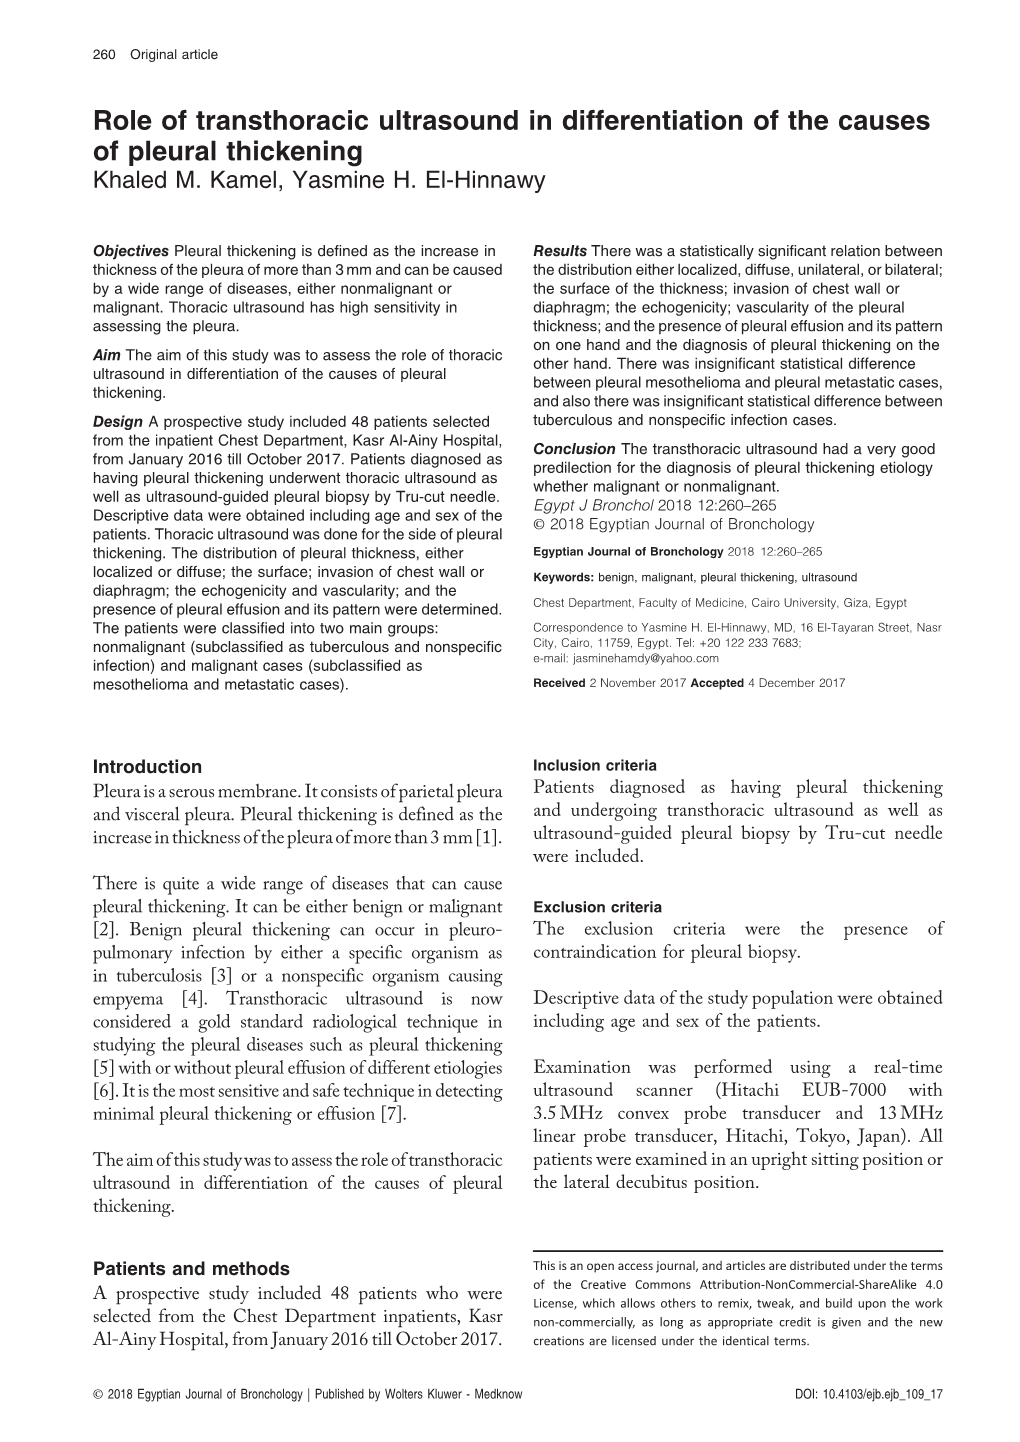 Role of Transthoracic Ultrasound in Differentiation of the Causes of Pleural Thickening Khaled M